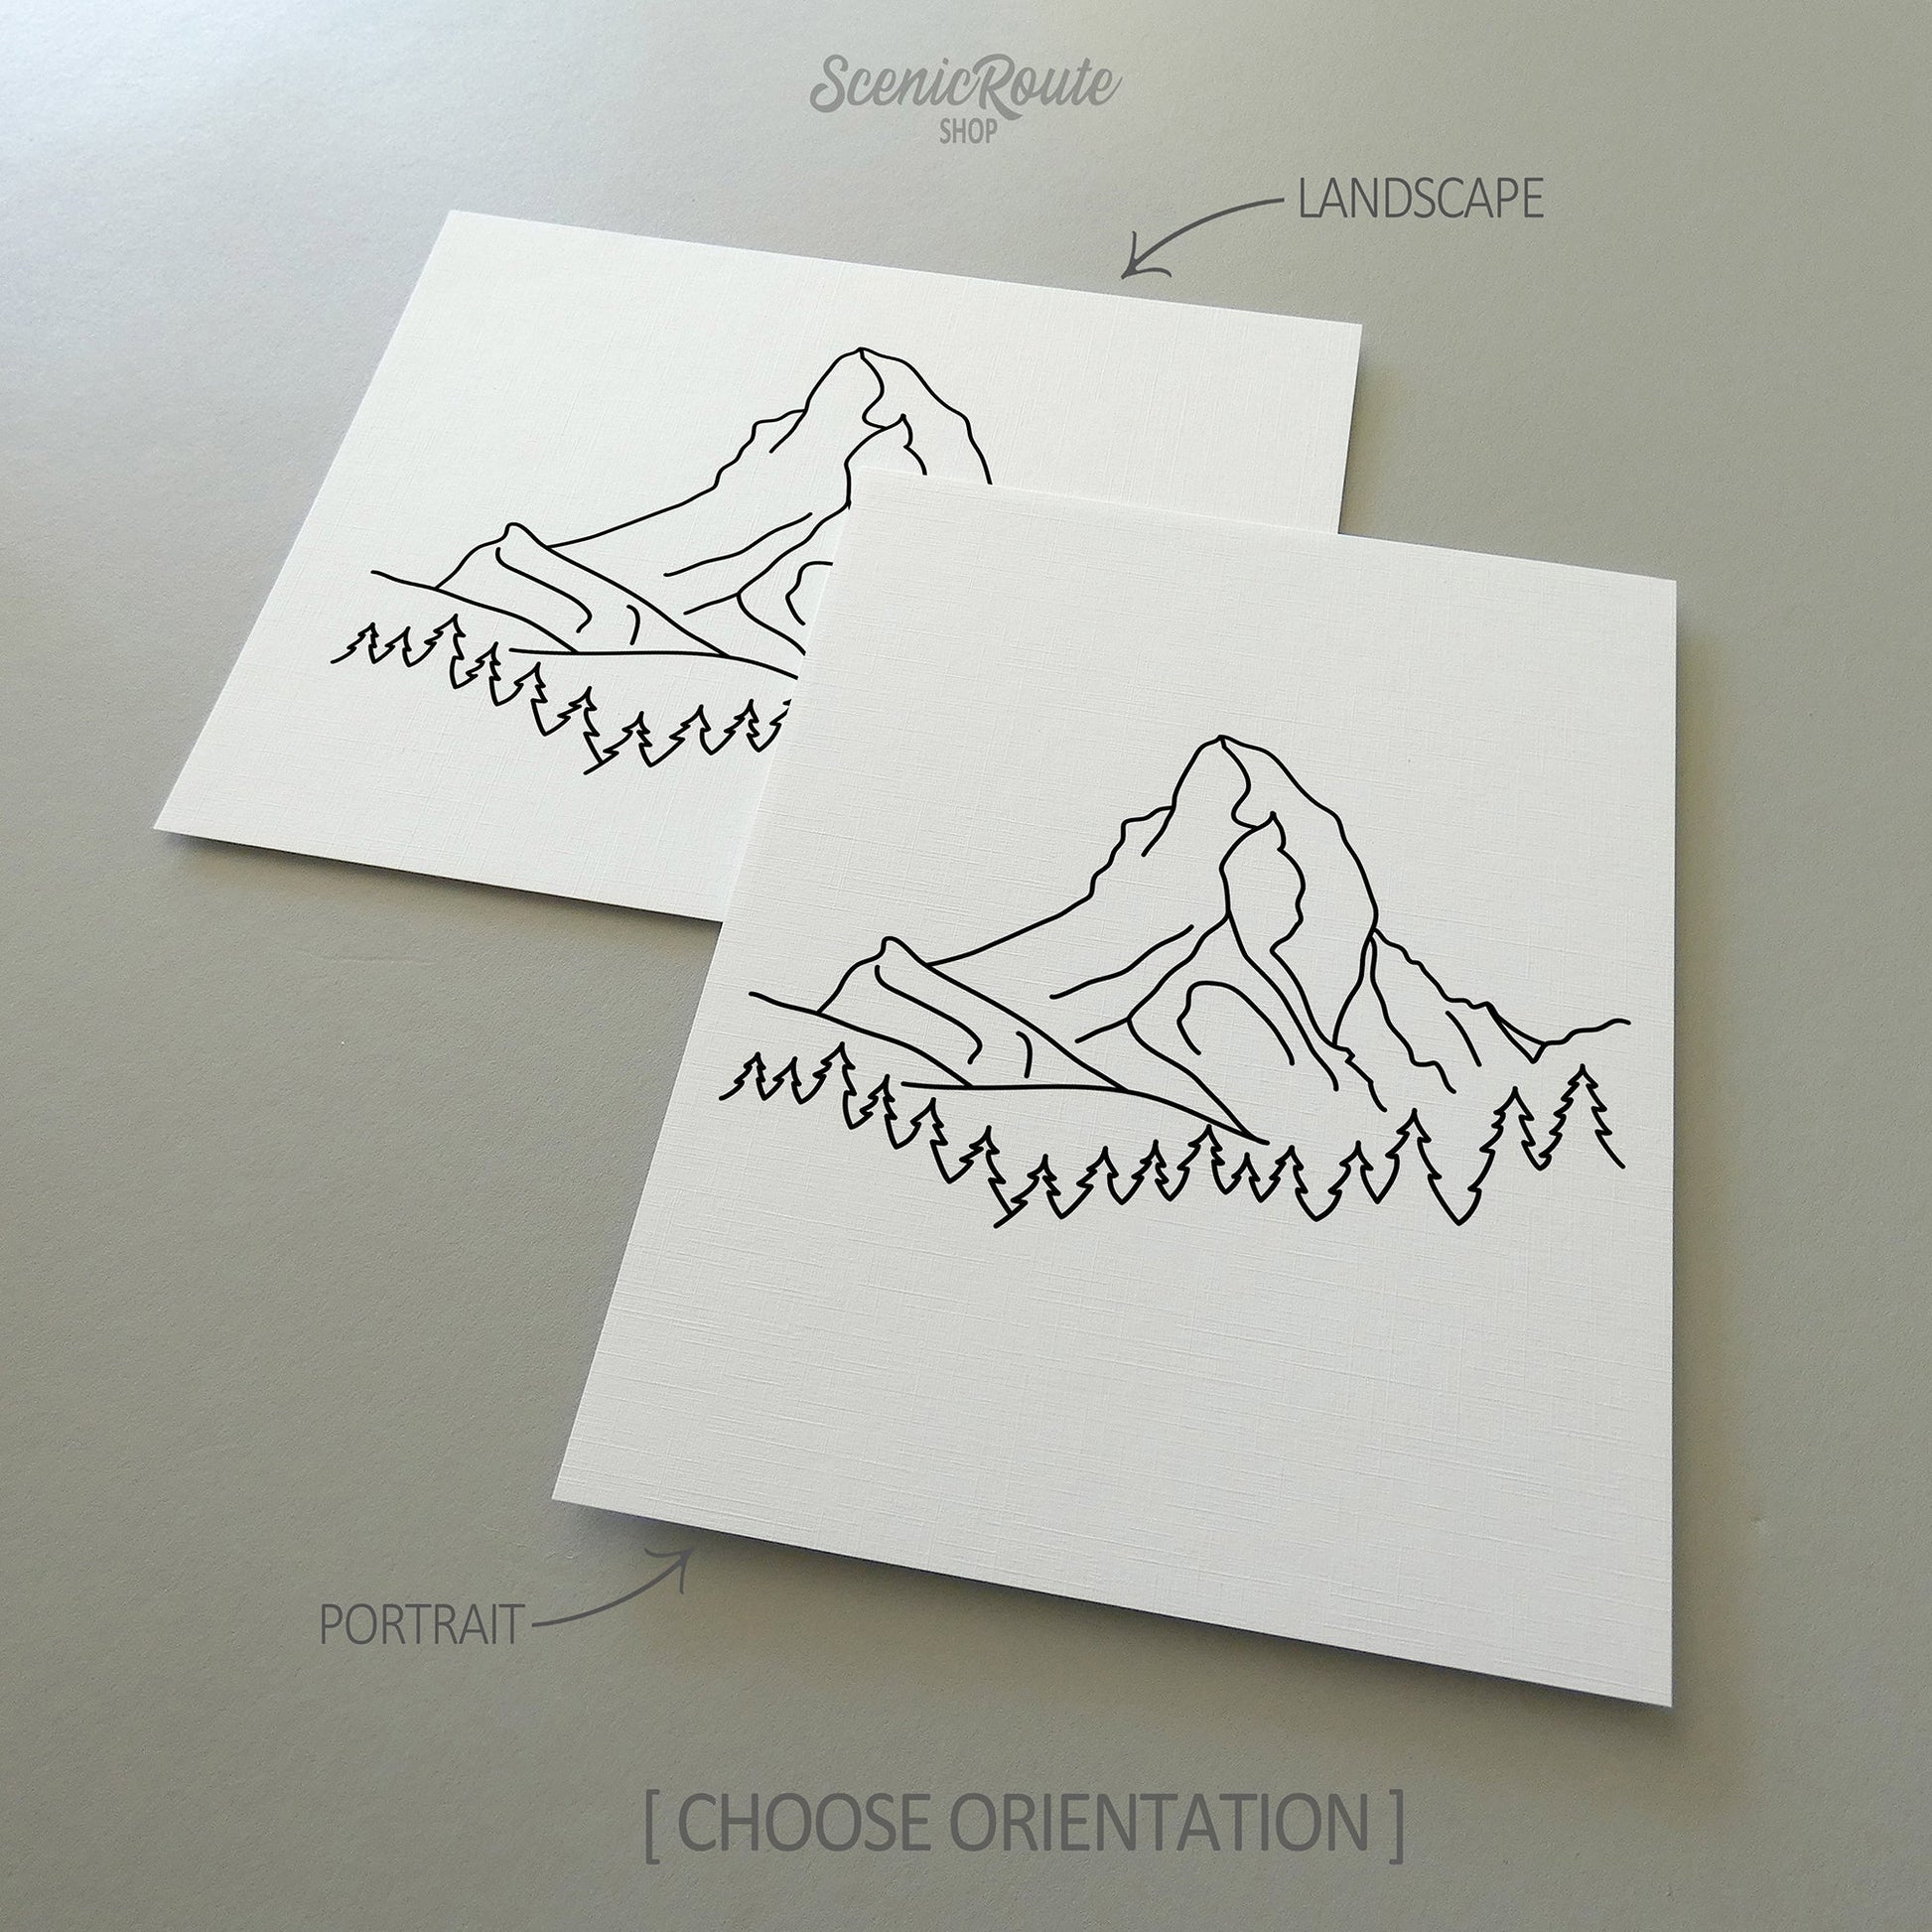 Two line art drawings of The Matterhorn on white linen paper with a gray background.  The pieces are shown in portrait and landscape orientation for the available art print options.